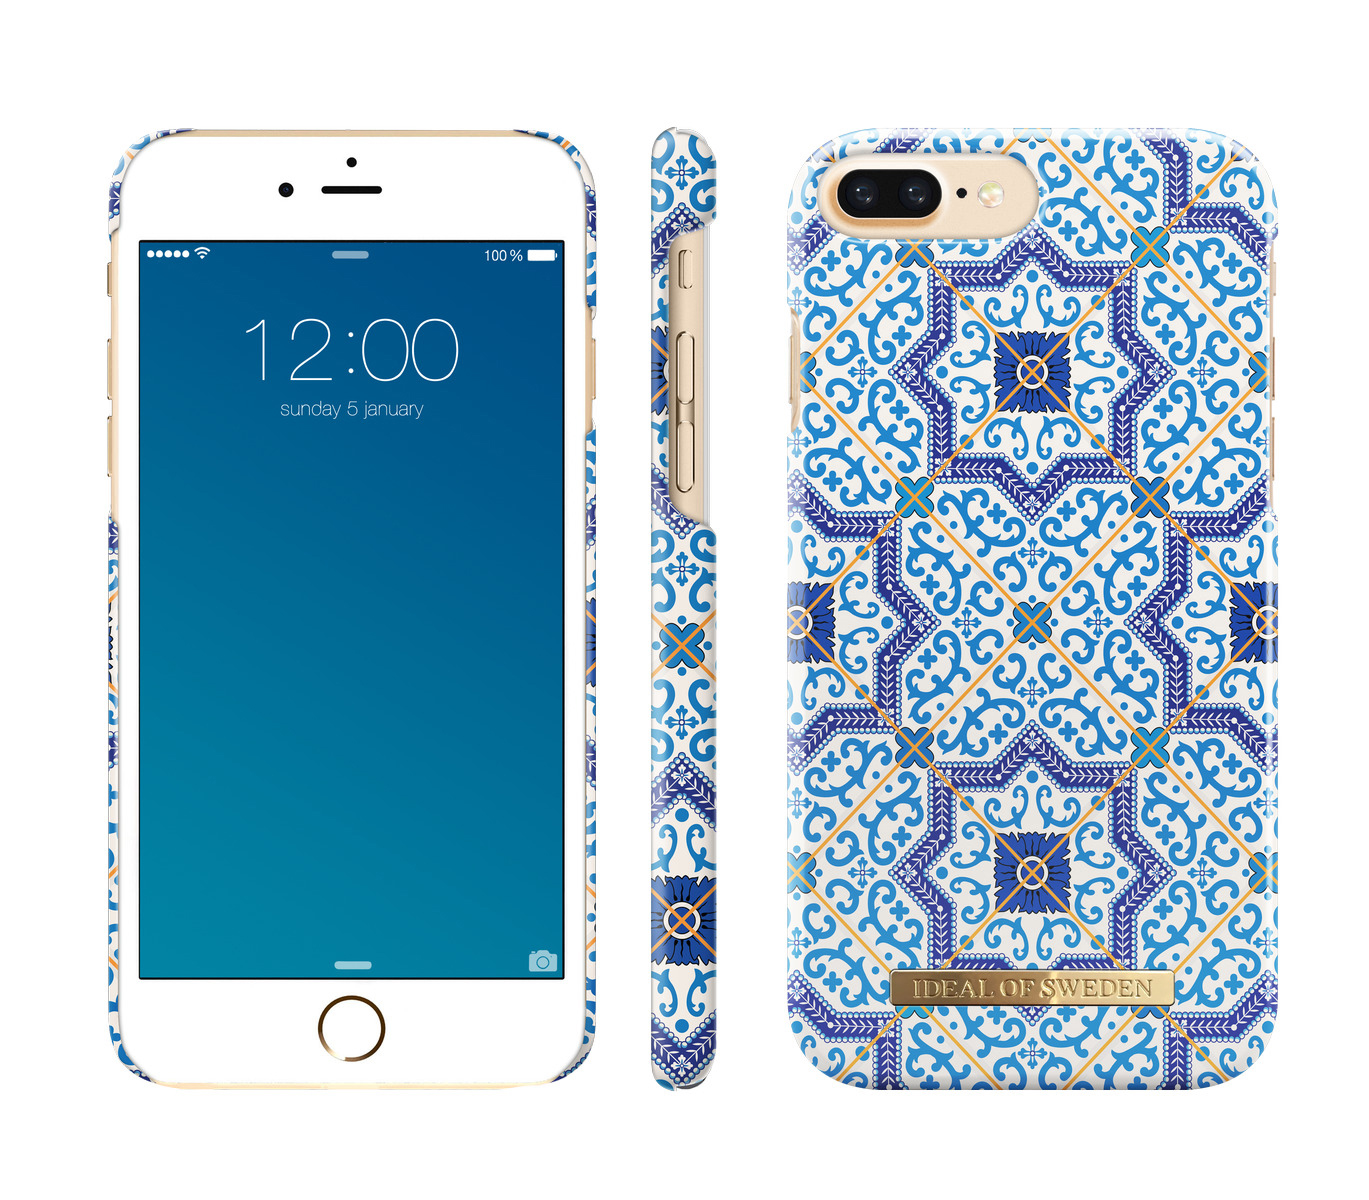 8 OF 7 Backcover, ,iPhone iPhone Marrakech Fashion, SWEDEN 6 iPhone Plus Plus, IDEAL Plus, Apple,